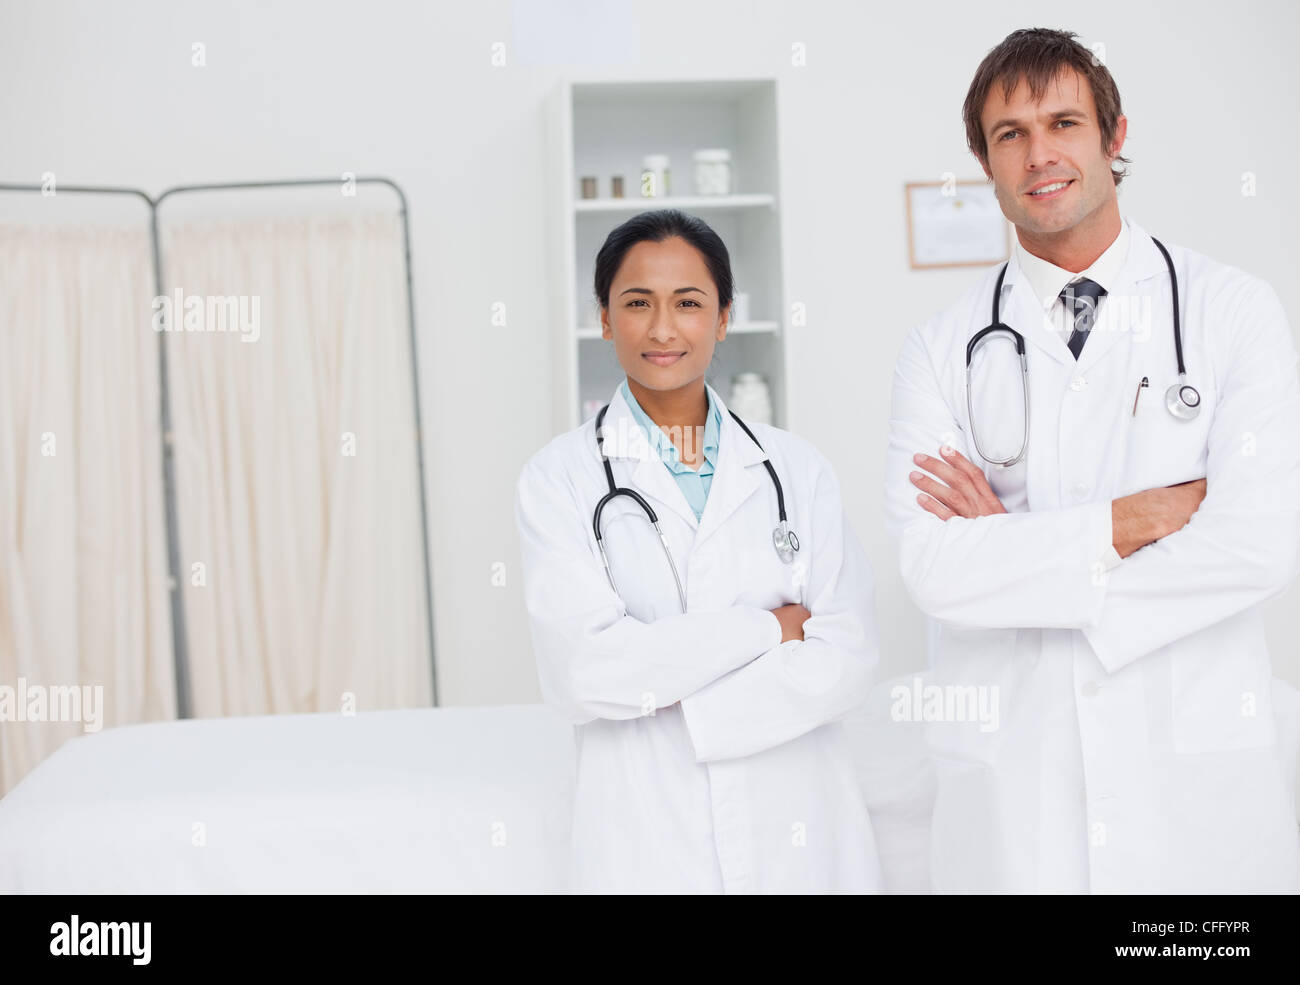 Smiling doctors crossing their arms while standing in a hospital room Stock Photo